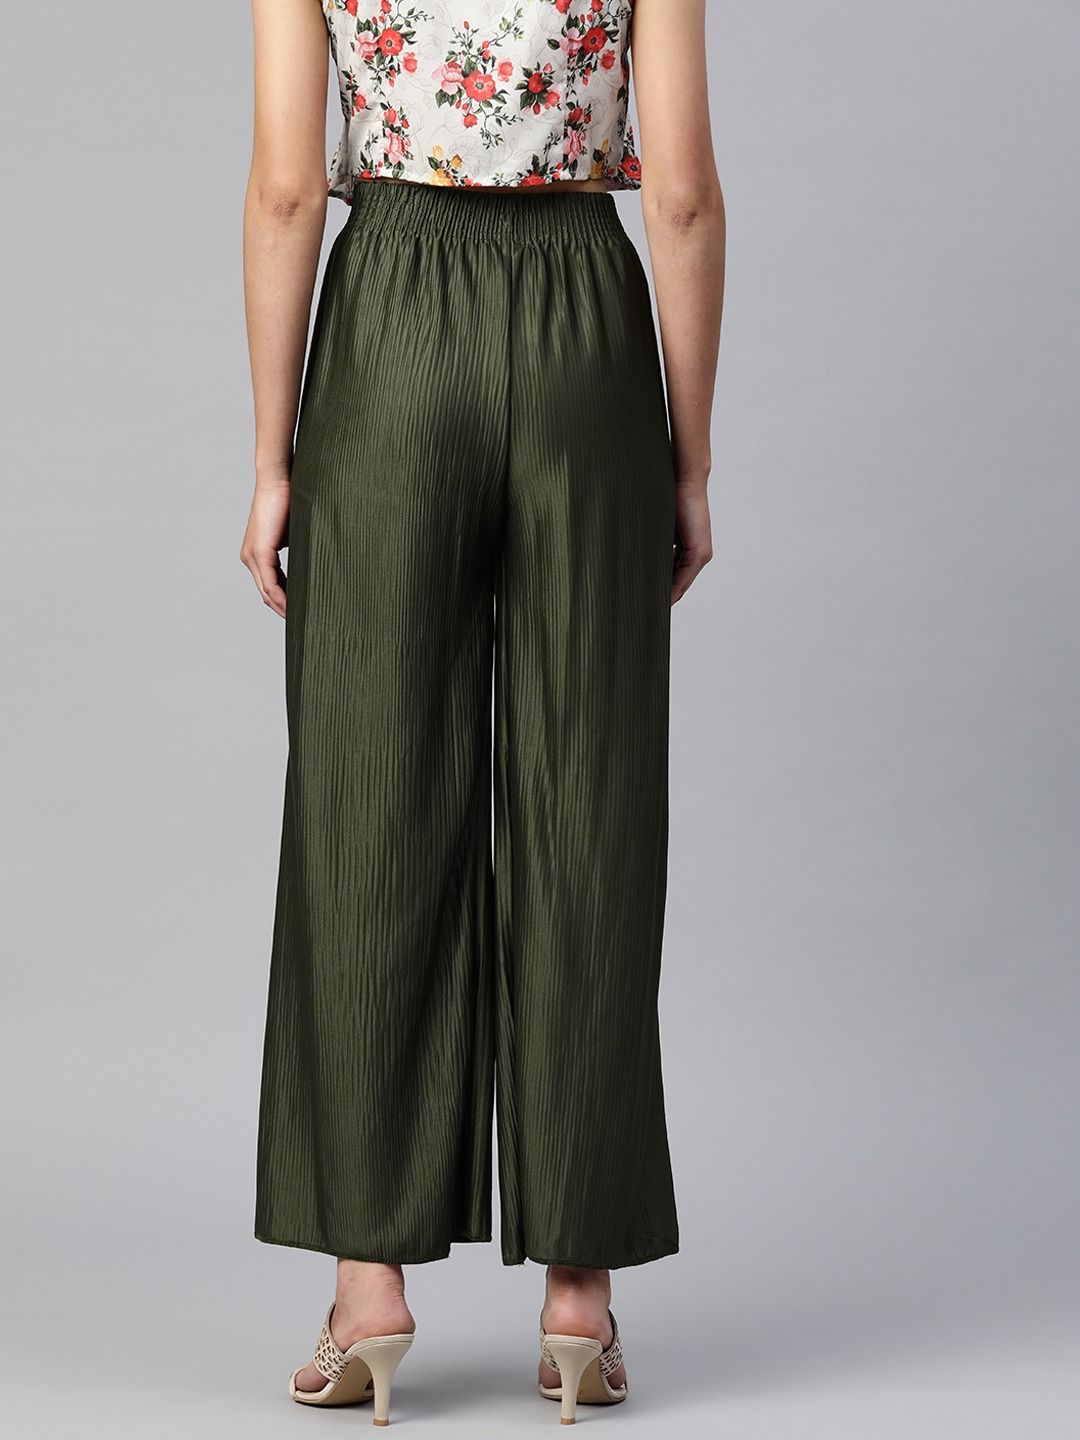 Buy Green Women Pants With Pockets/100% Polyester/palazzo Pants/wide Leg  Pants Online in India - Etsy